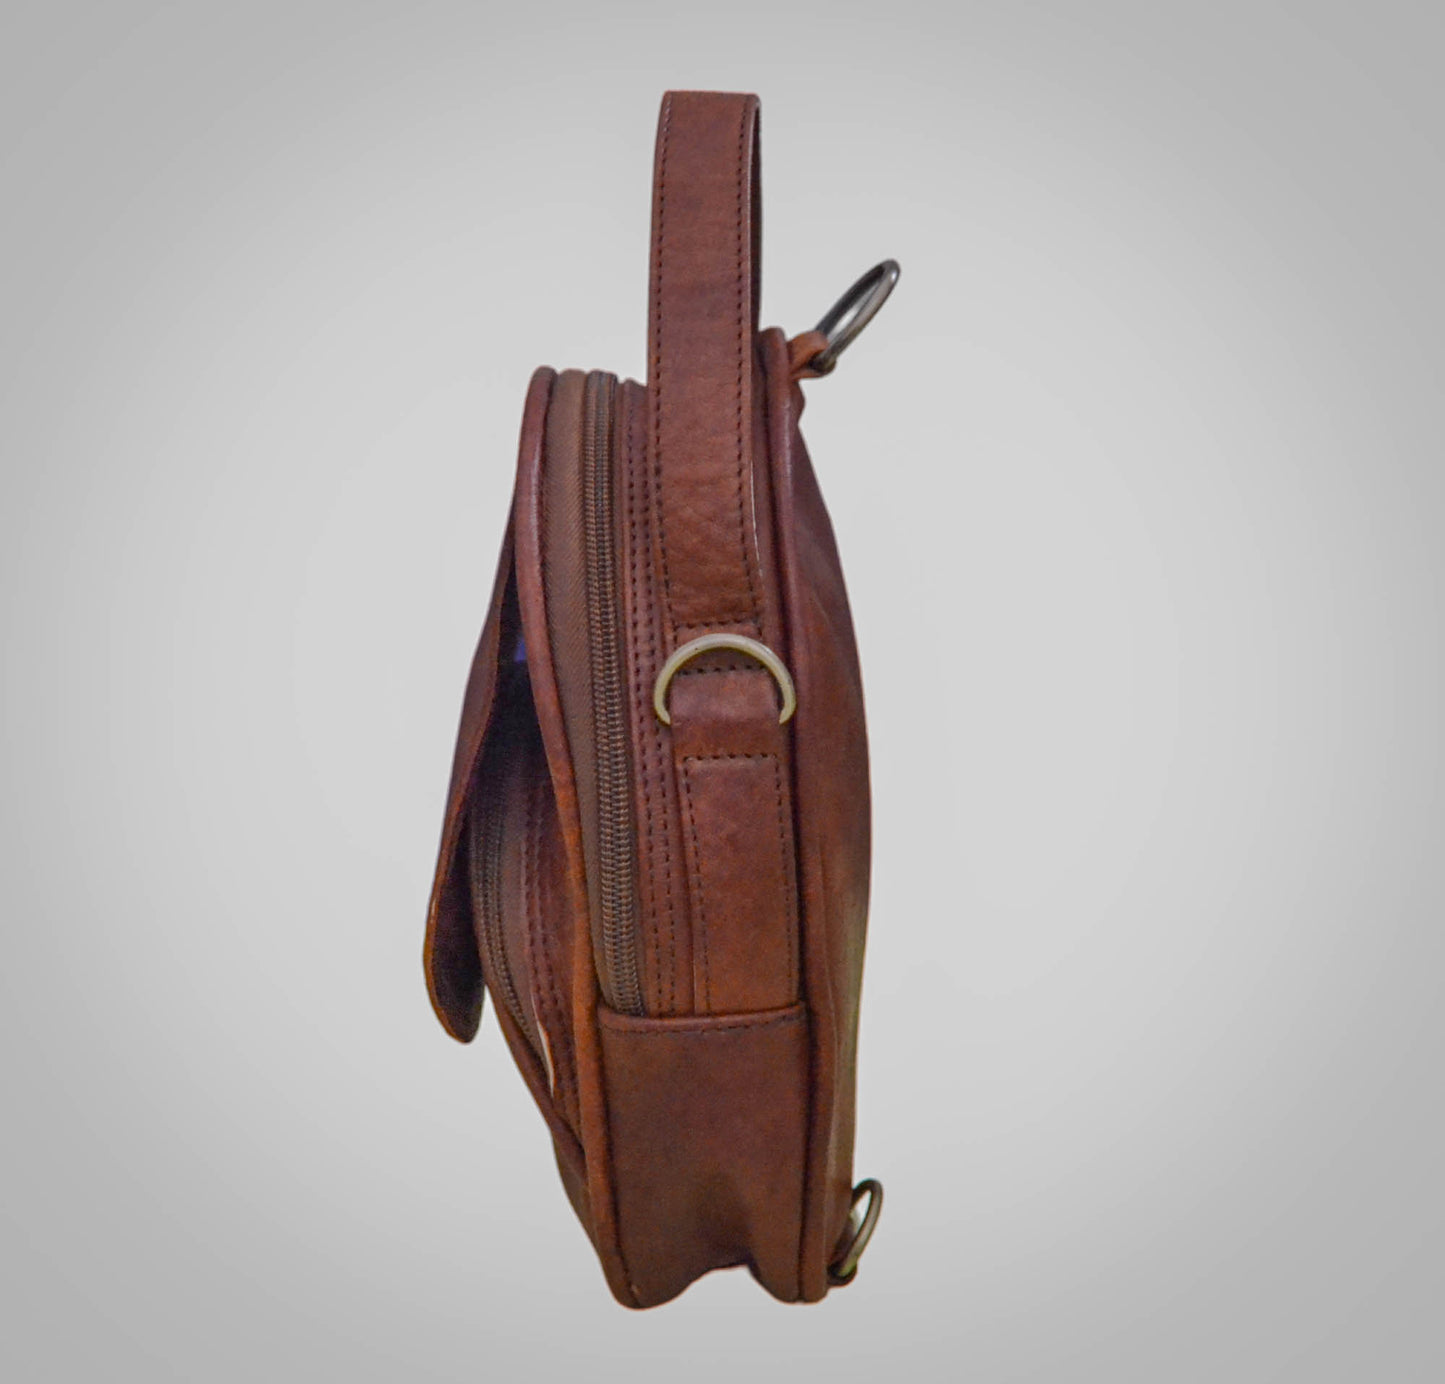 Small leather backpack